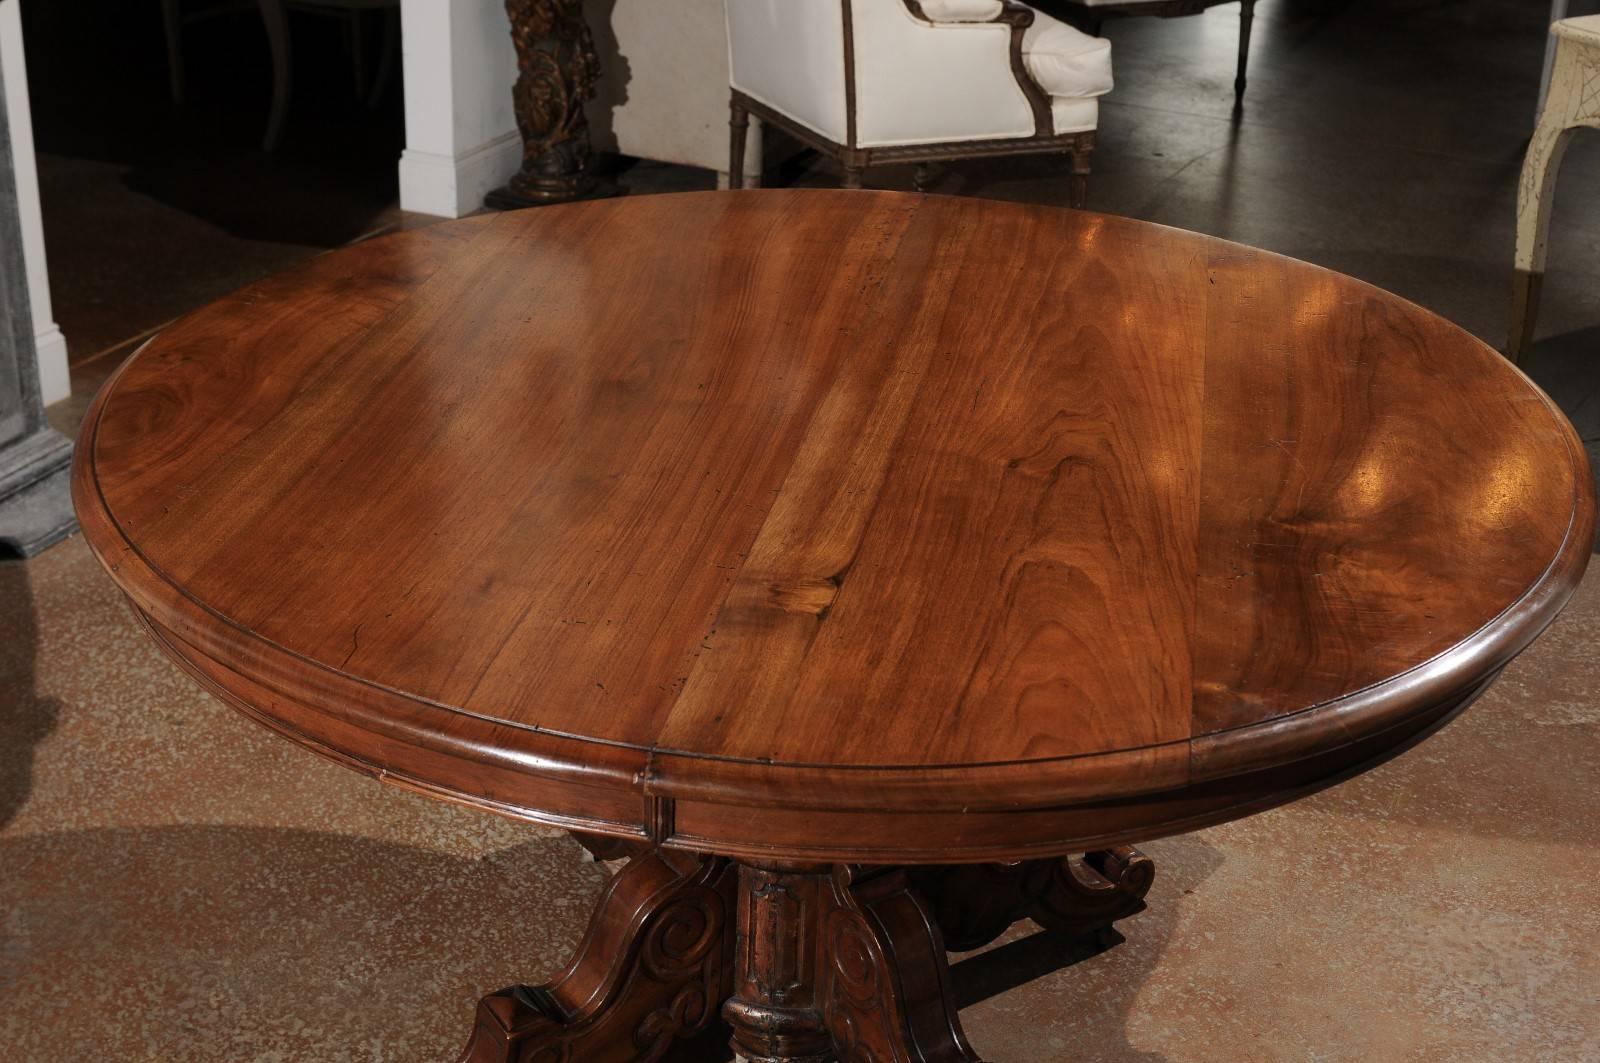 French Napoléon III Walnut Pedestal Table with Carved Feet from the 1850s 1